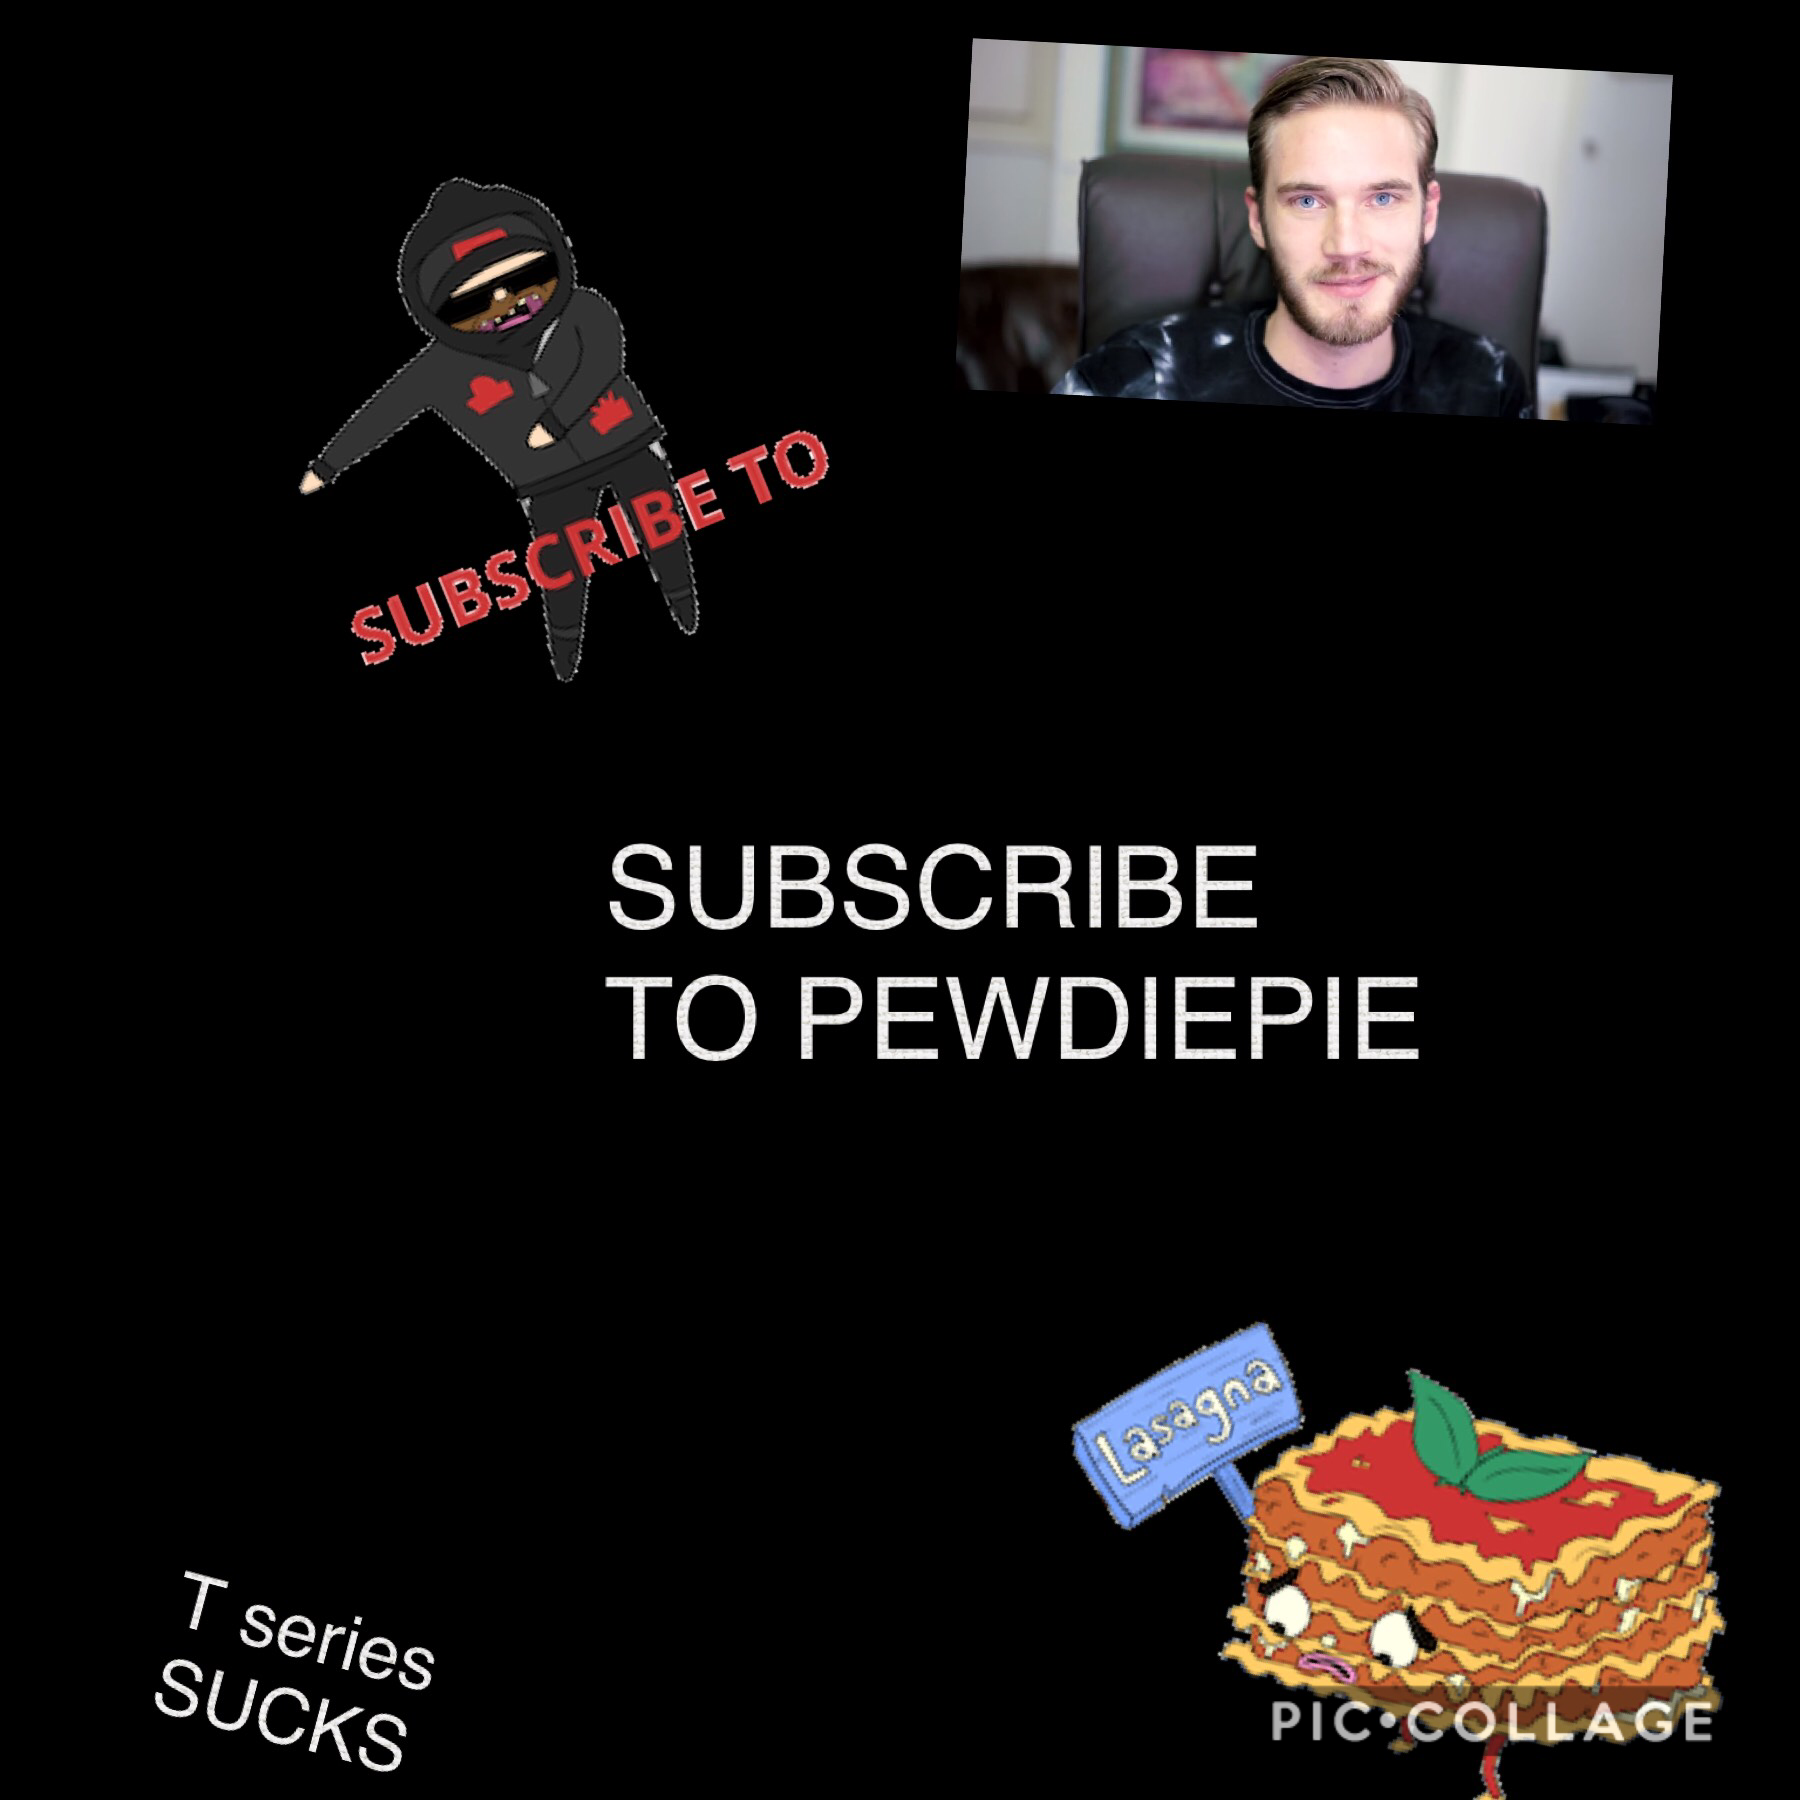 SUBSCRIBE TO PEWDIEPIE 